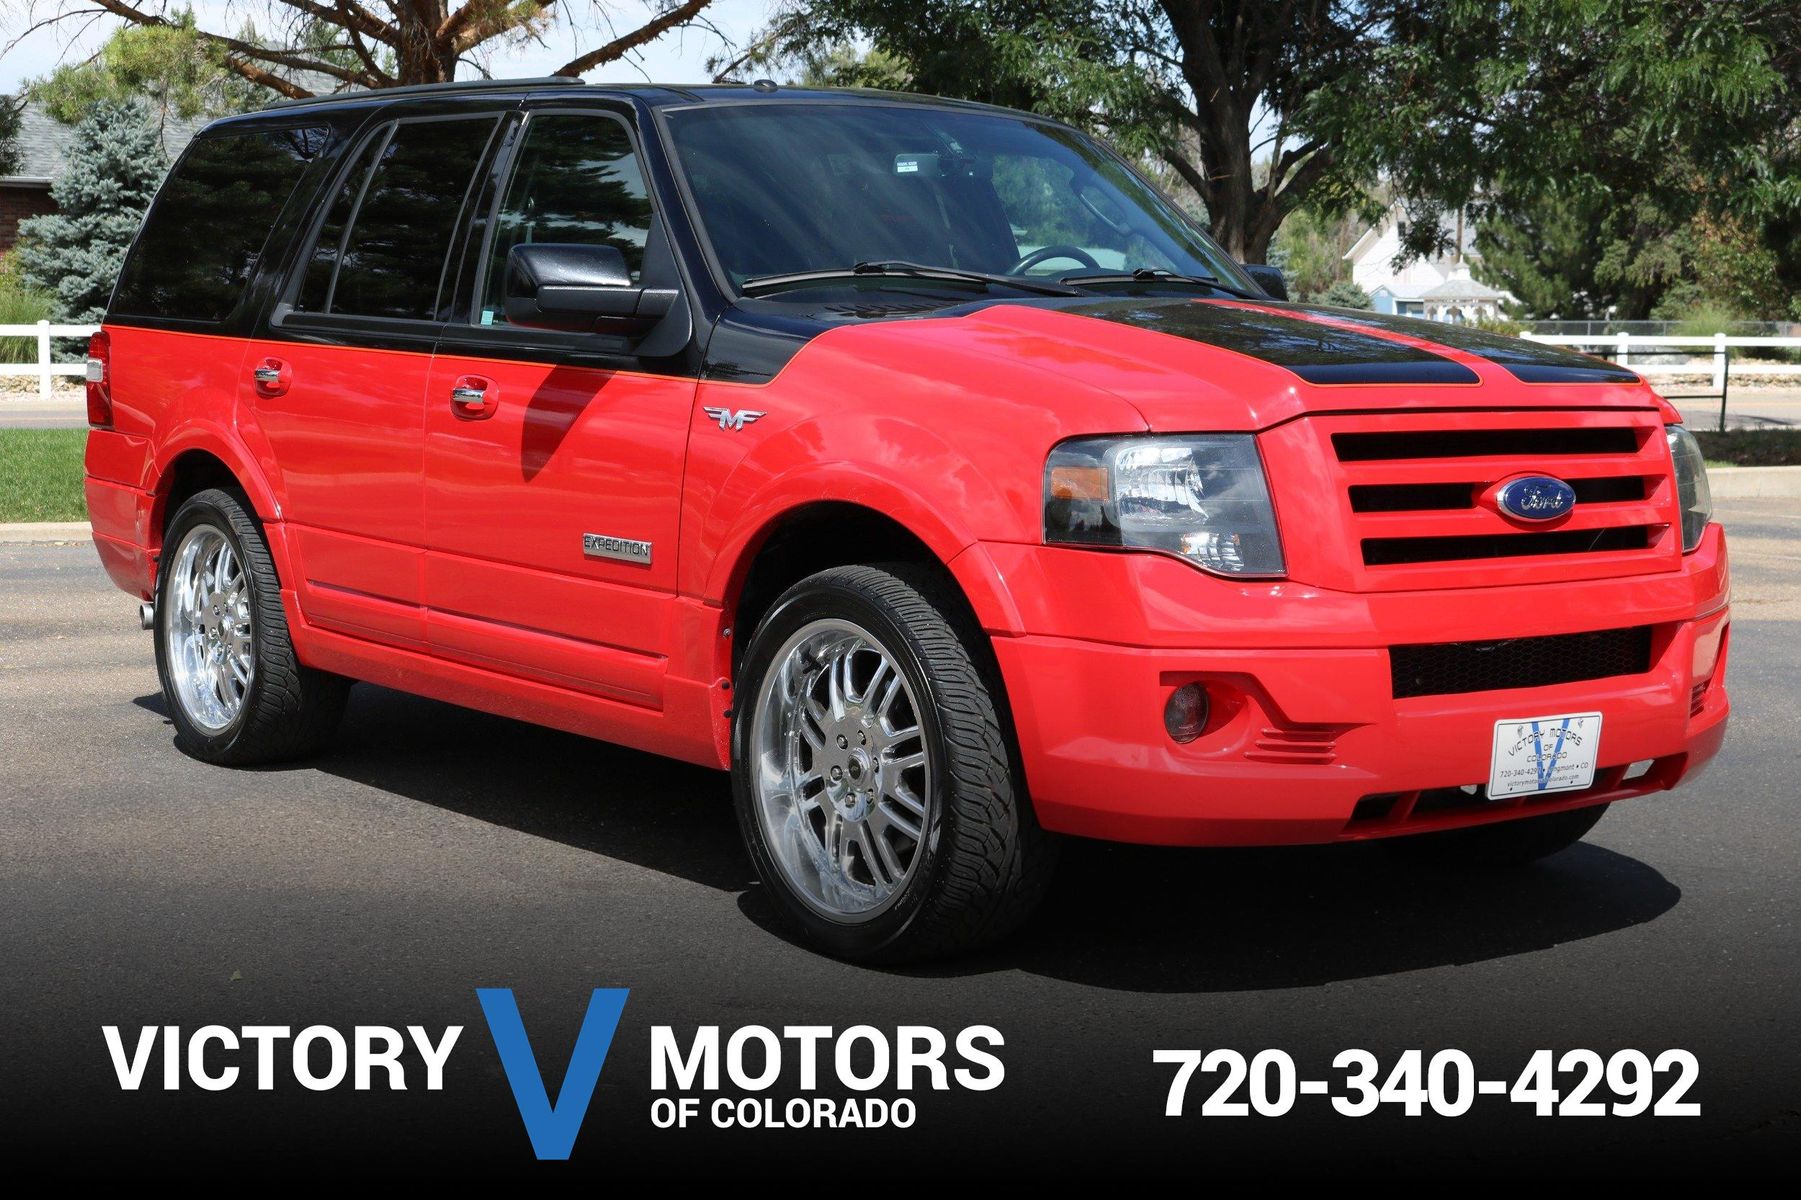 2008 Ford Expedition Funk Master Flex Edition | Victory Motors of Colorado 1998 Ford Expedition 5.4 Towing Capacity